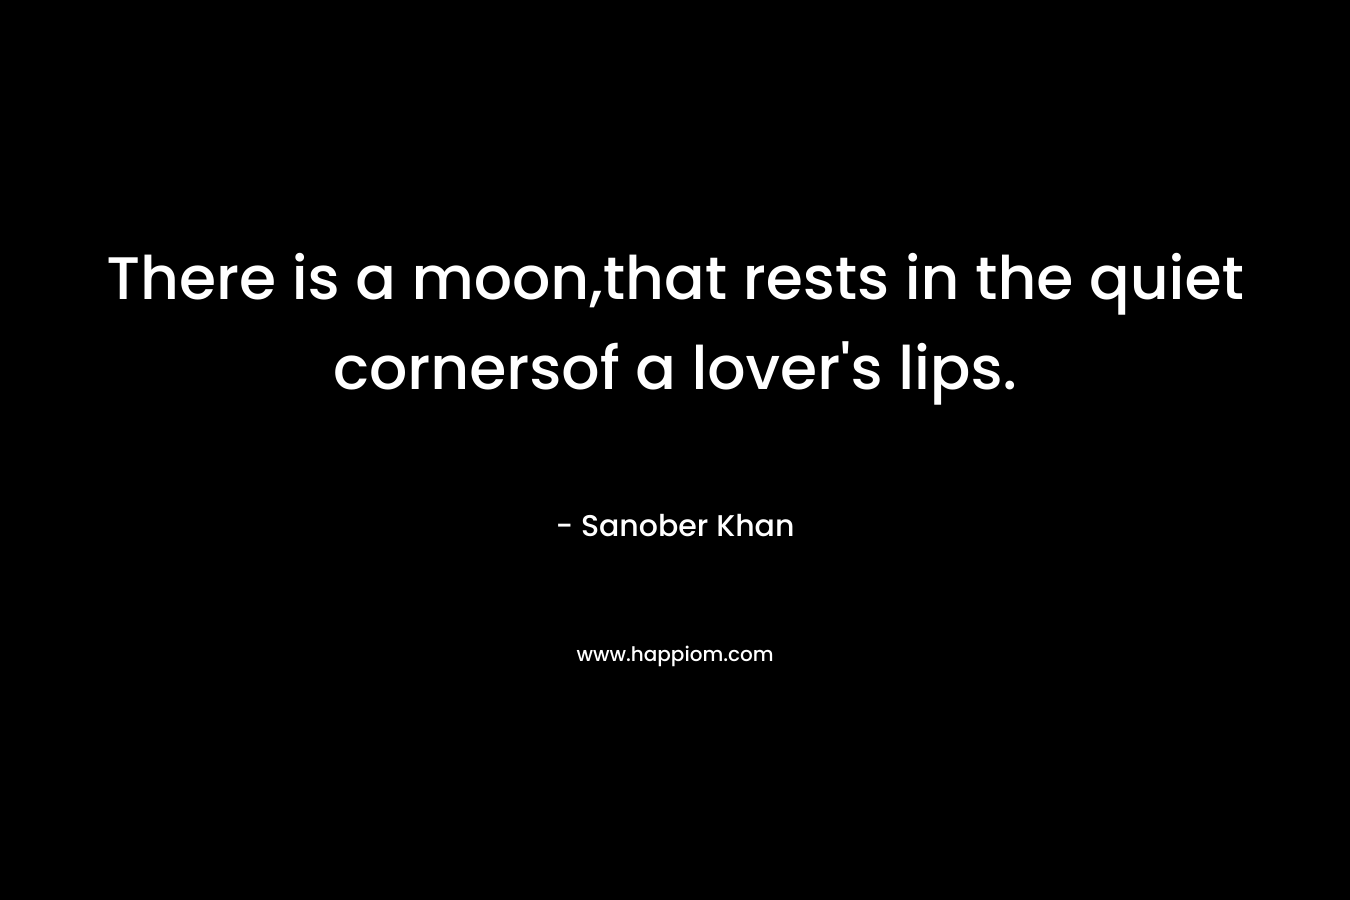 There is a moon,that rests in the quiet cornersof a lover’s lips. – Sanober  Khan